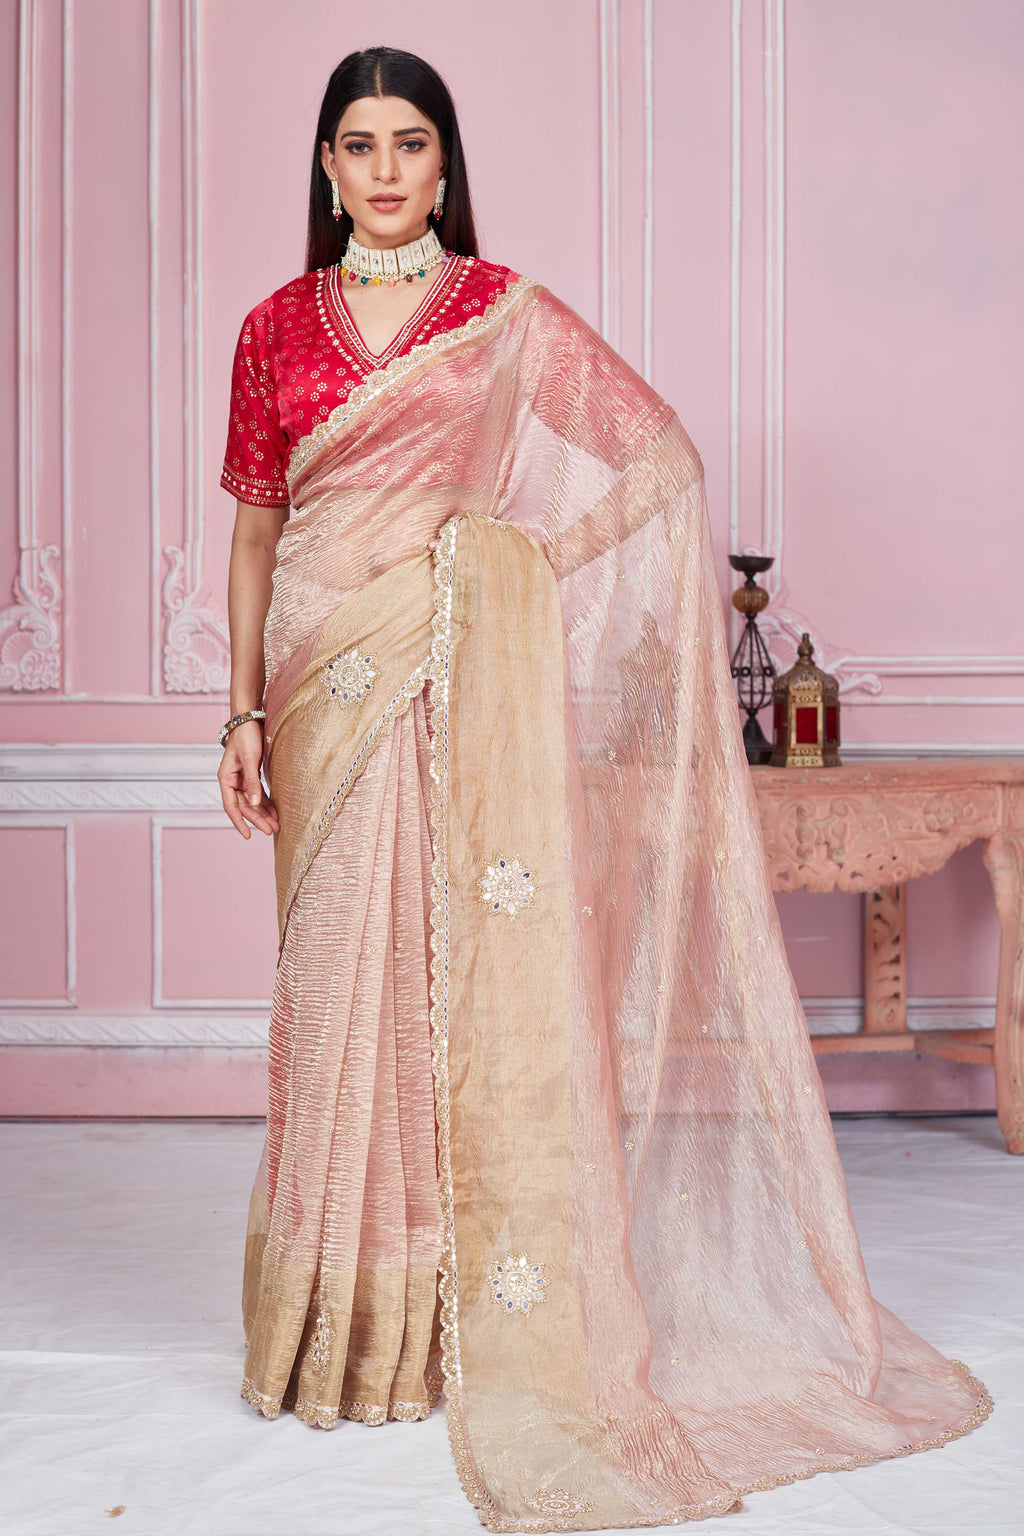 Buy champagne pink tissue silk sari online in USA with red blouse. Look your best on festive occasions in latest designer sarees, pure silk sarees, Kanjivaram silk saris, handwoven saris, tussar silk sarees, embroidered saris from Pure Elegance Indian clothing store in USA.-full view